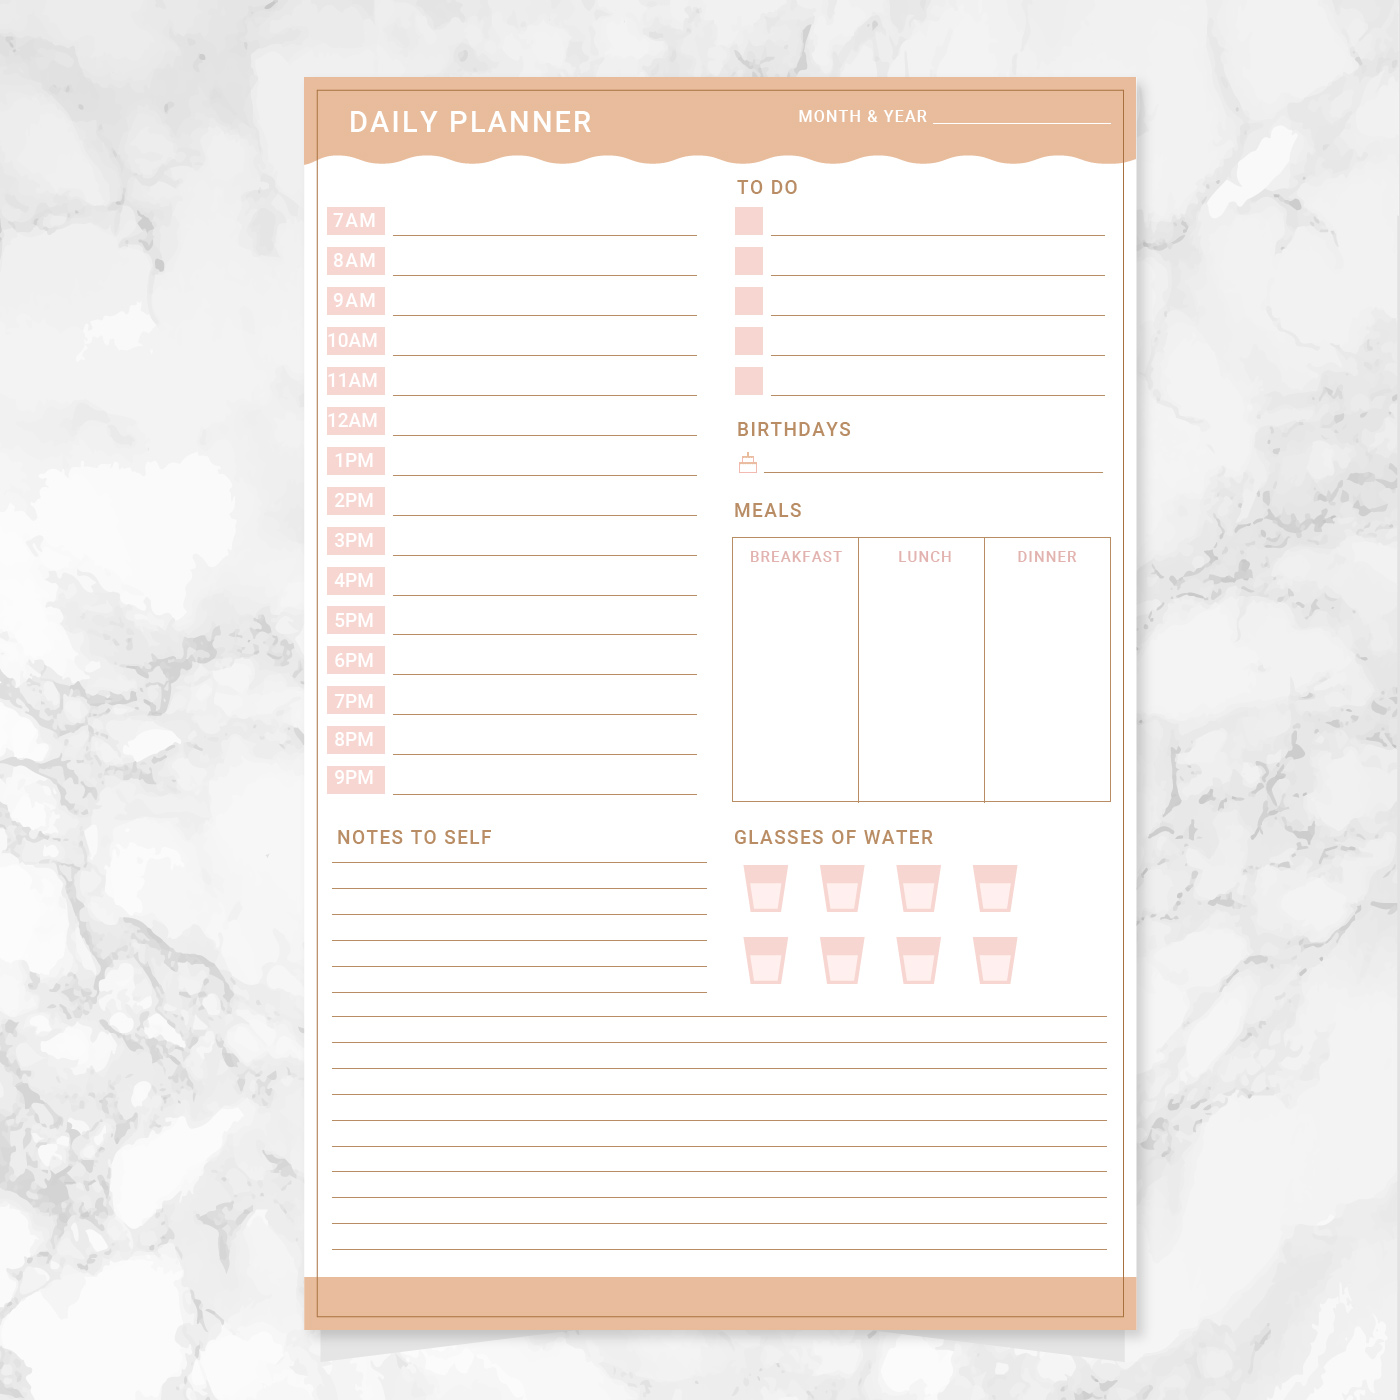 Daily Planner Template Printable from static.vecteezy.com